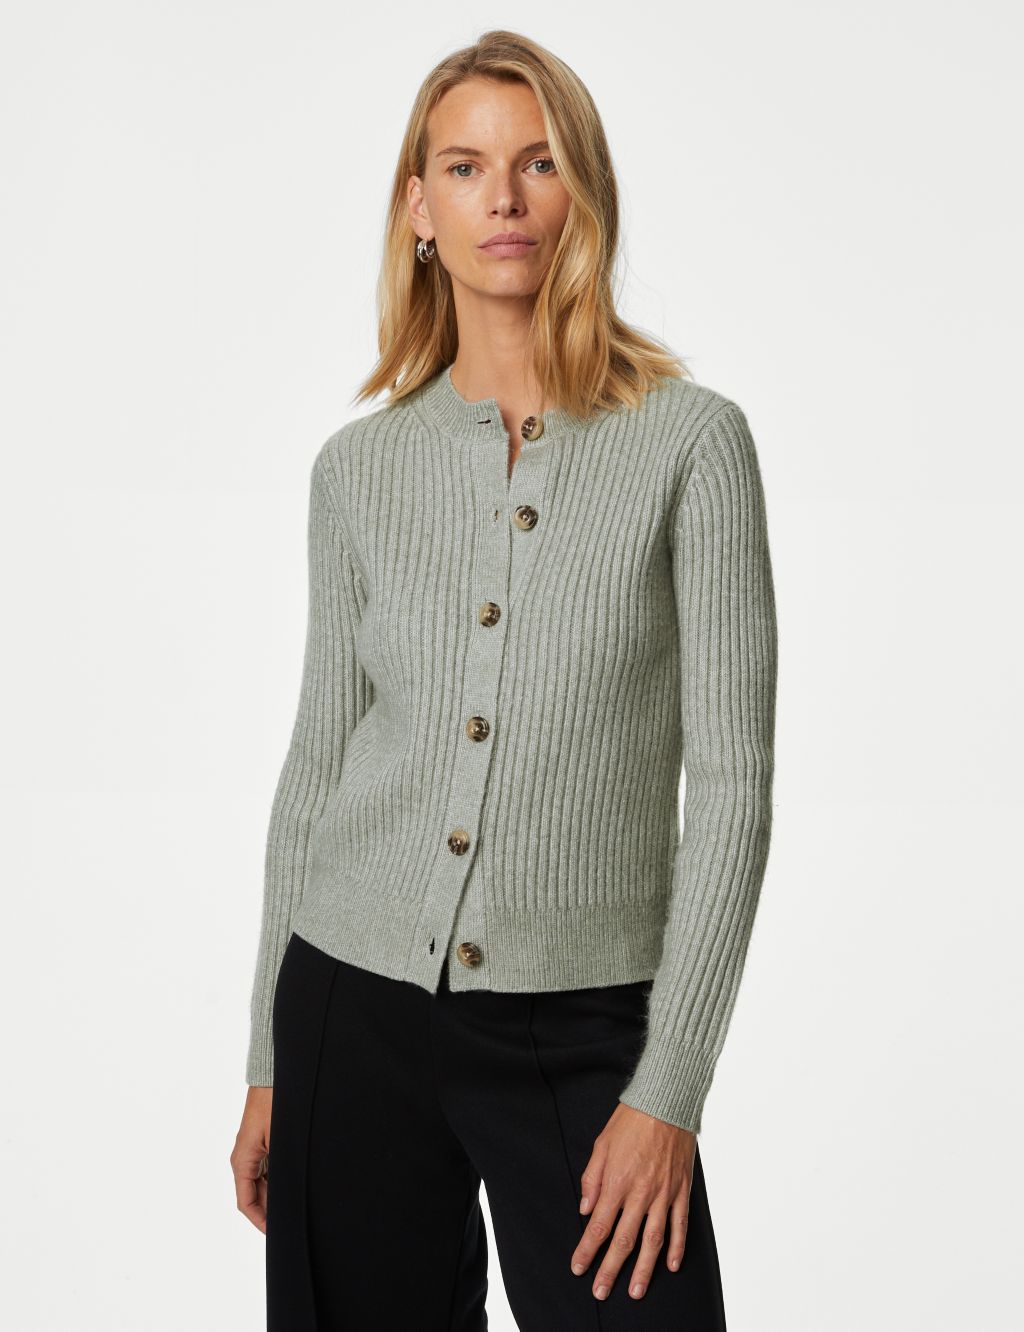 Knitted Ribbed Crew Neck Cardigan image 1